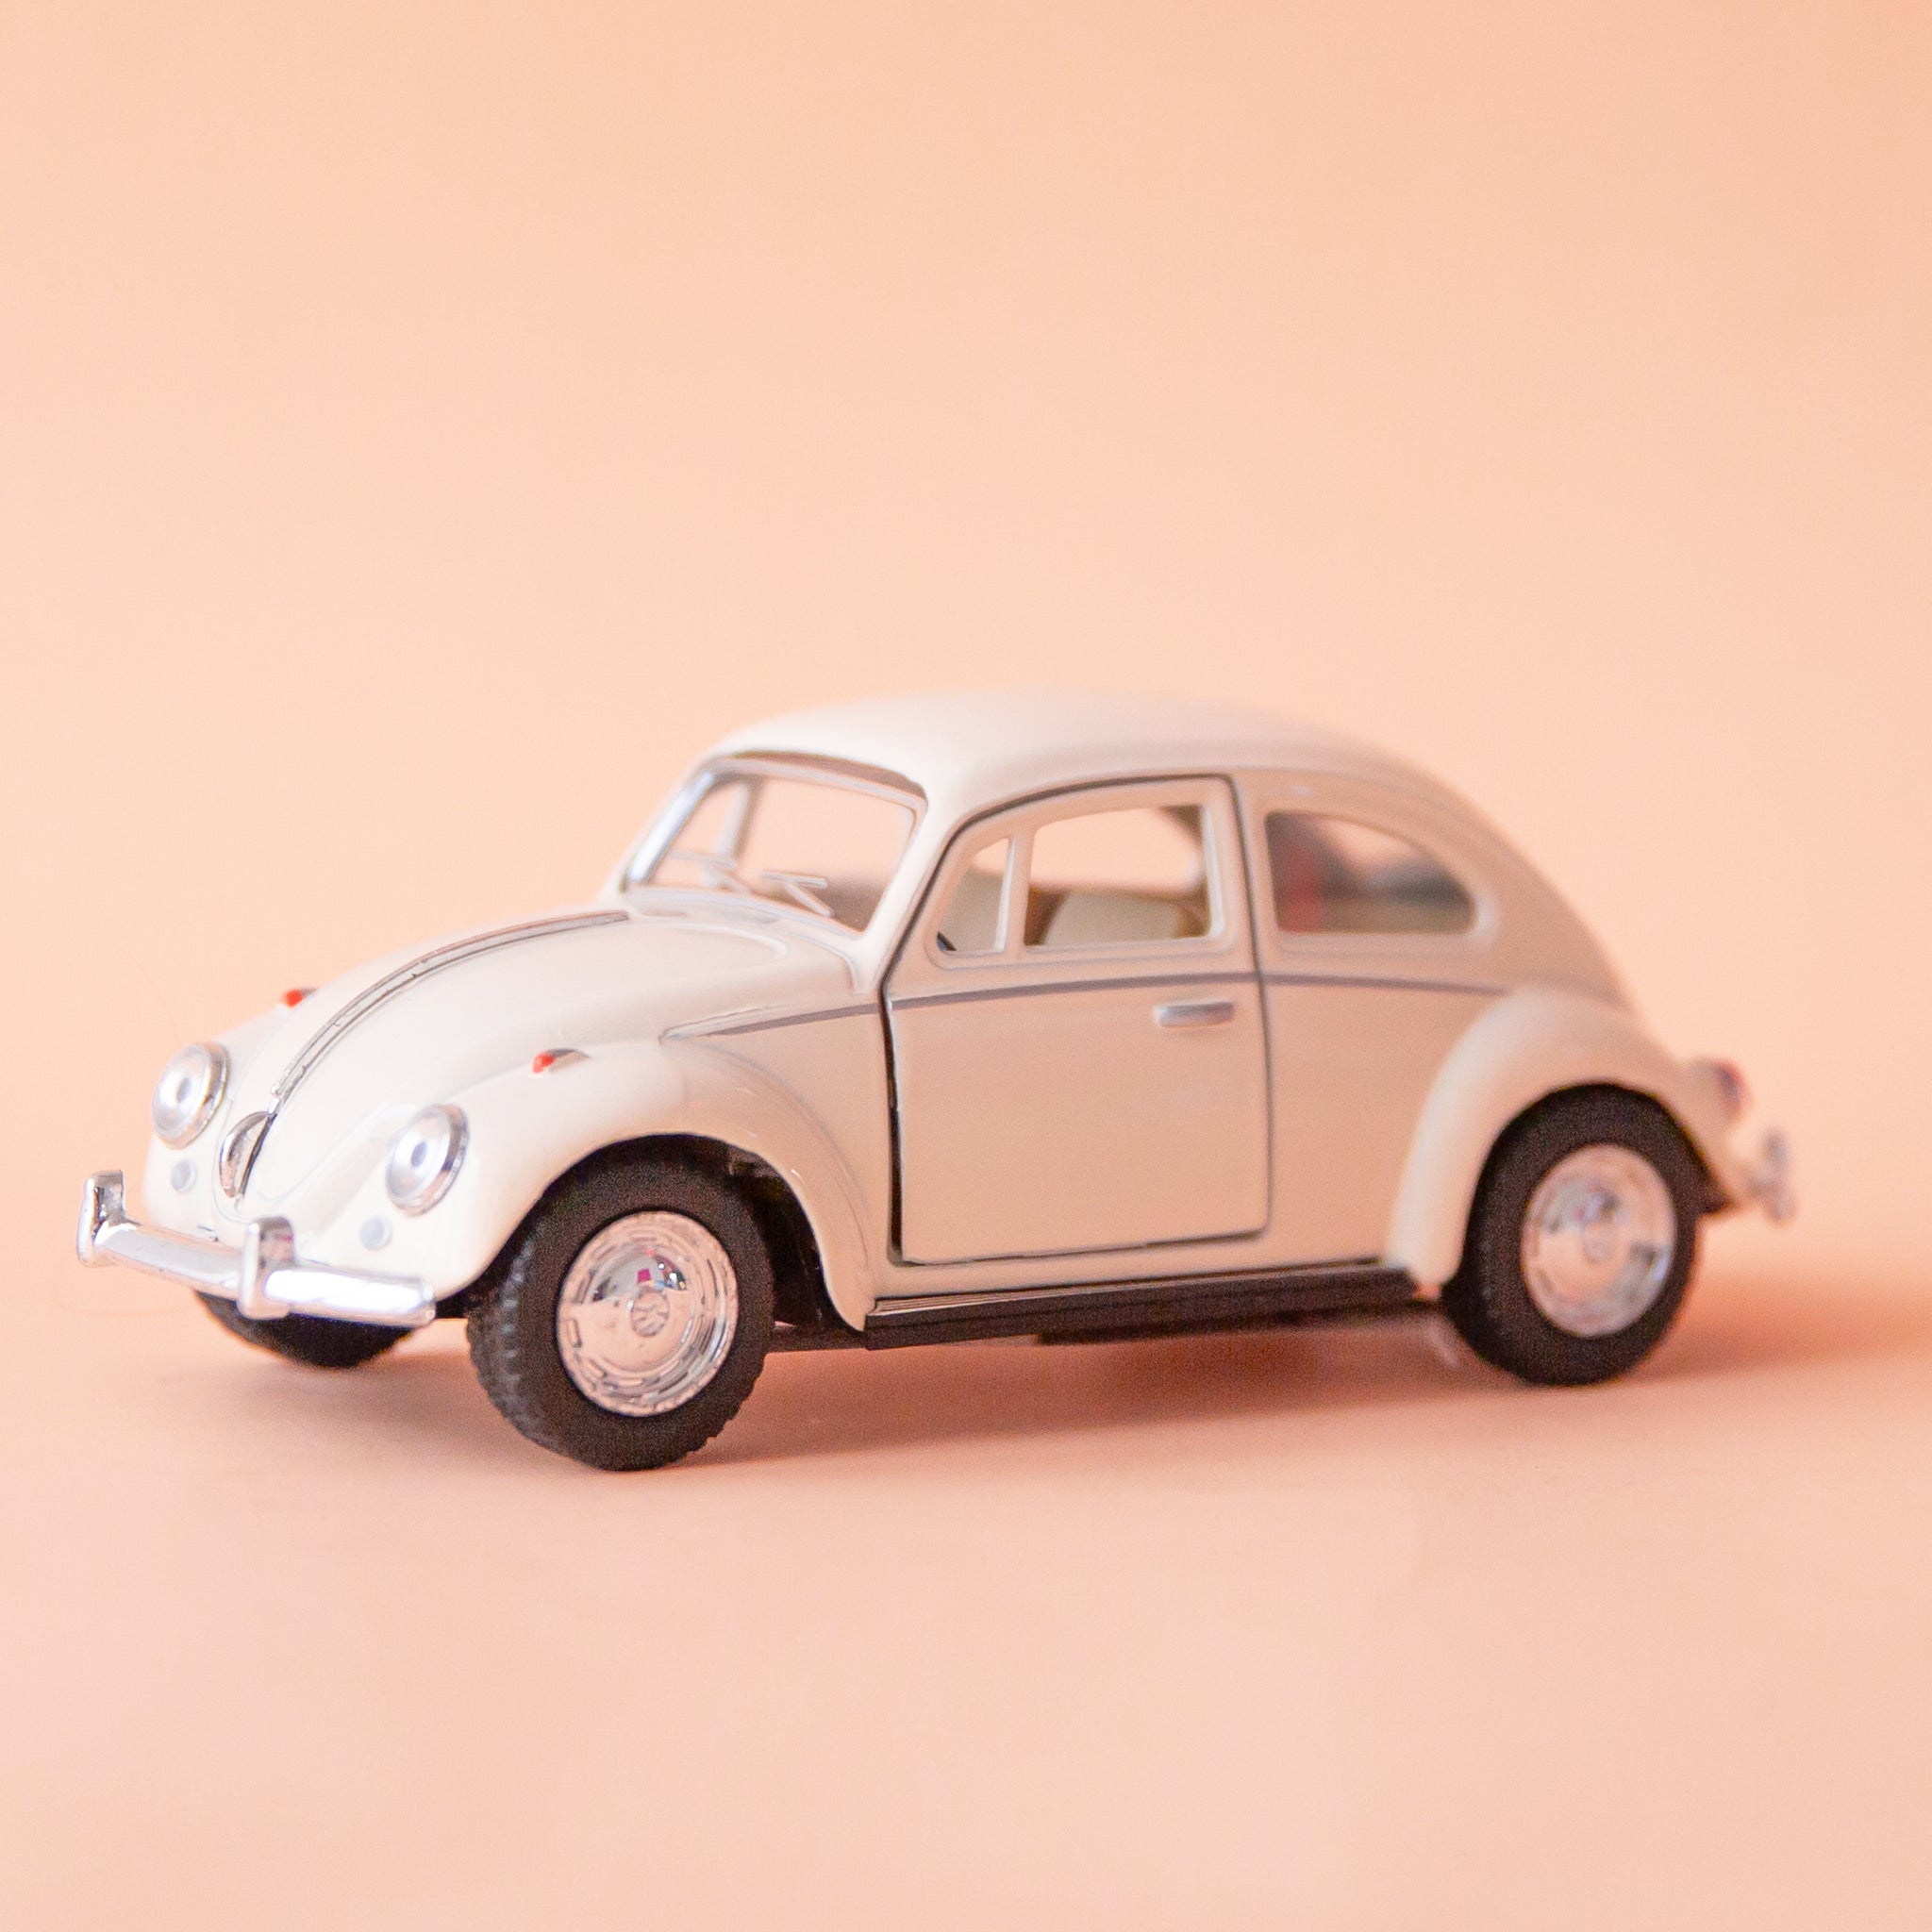 On a tan background is a white beetle toy car. 